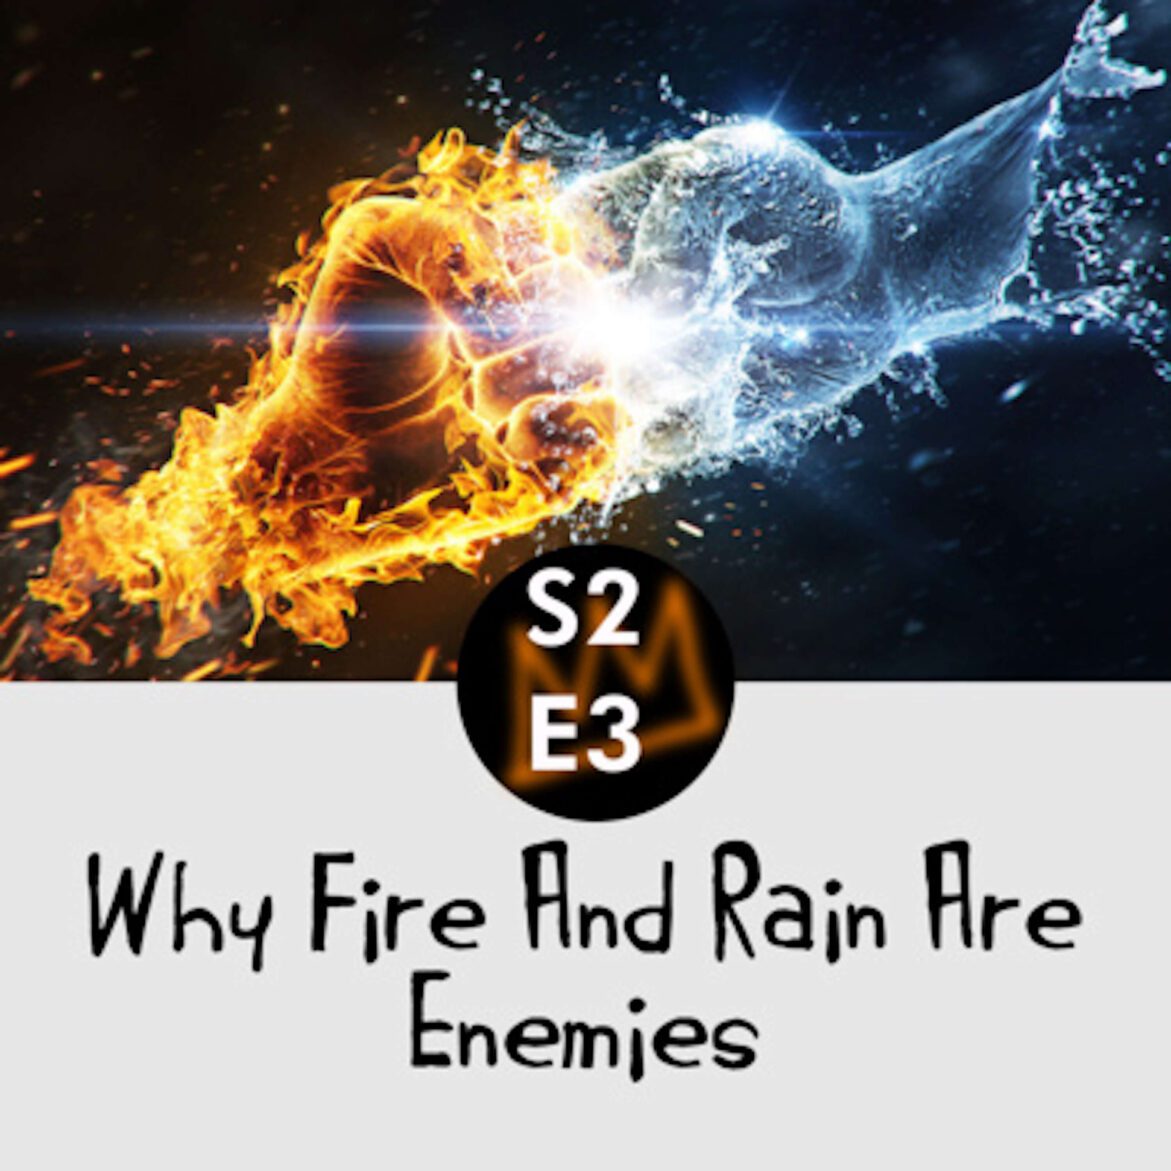 Black Podcasting - Why fire and rain are enemies an African folktale